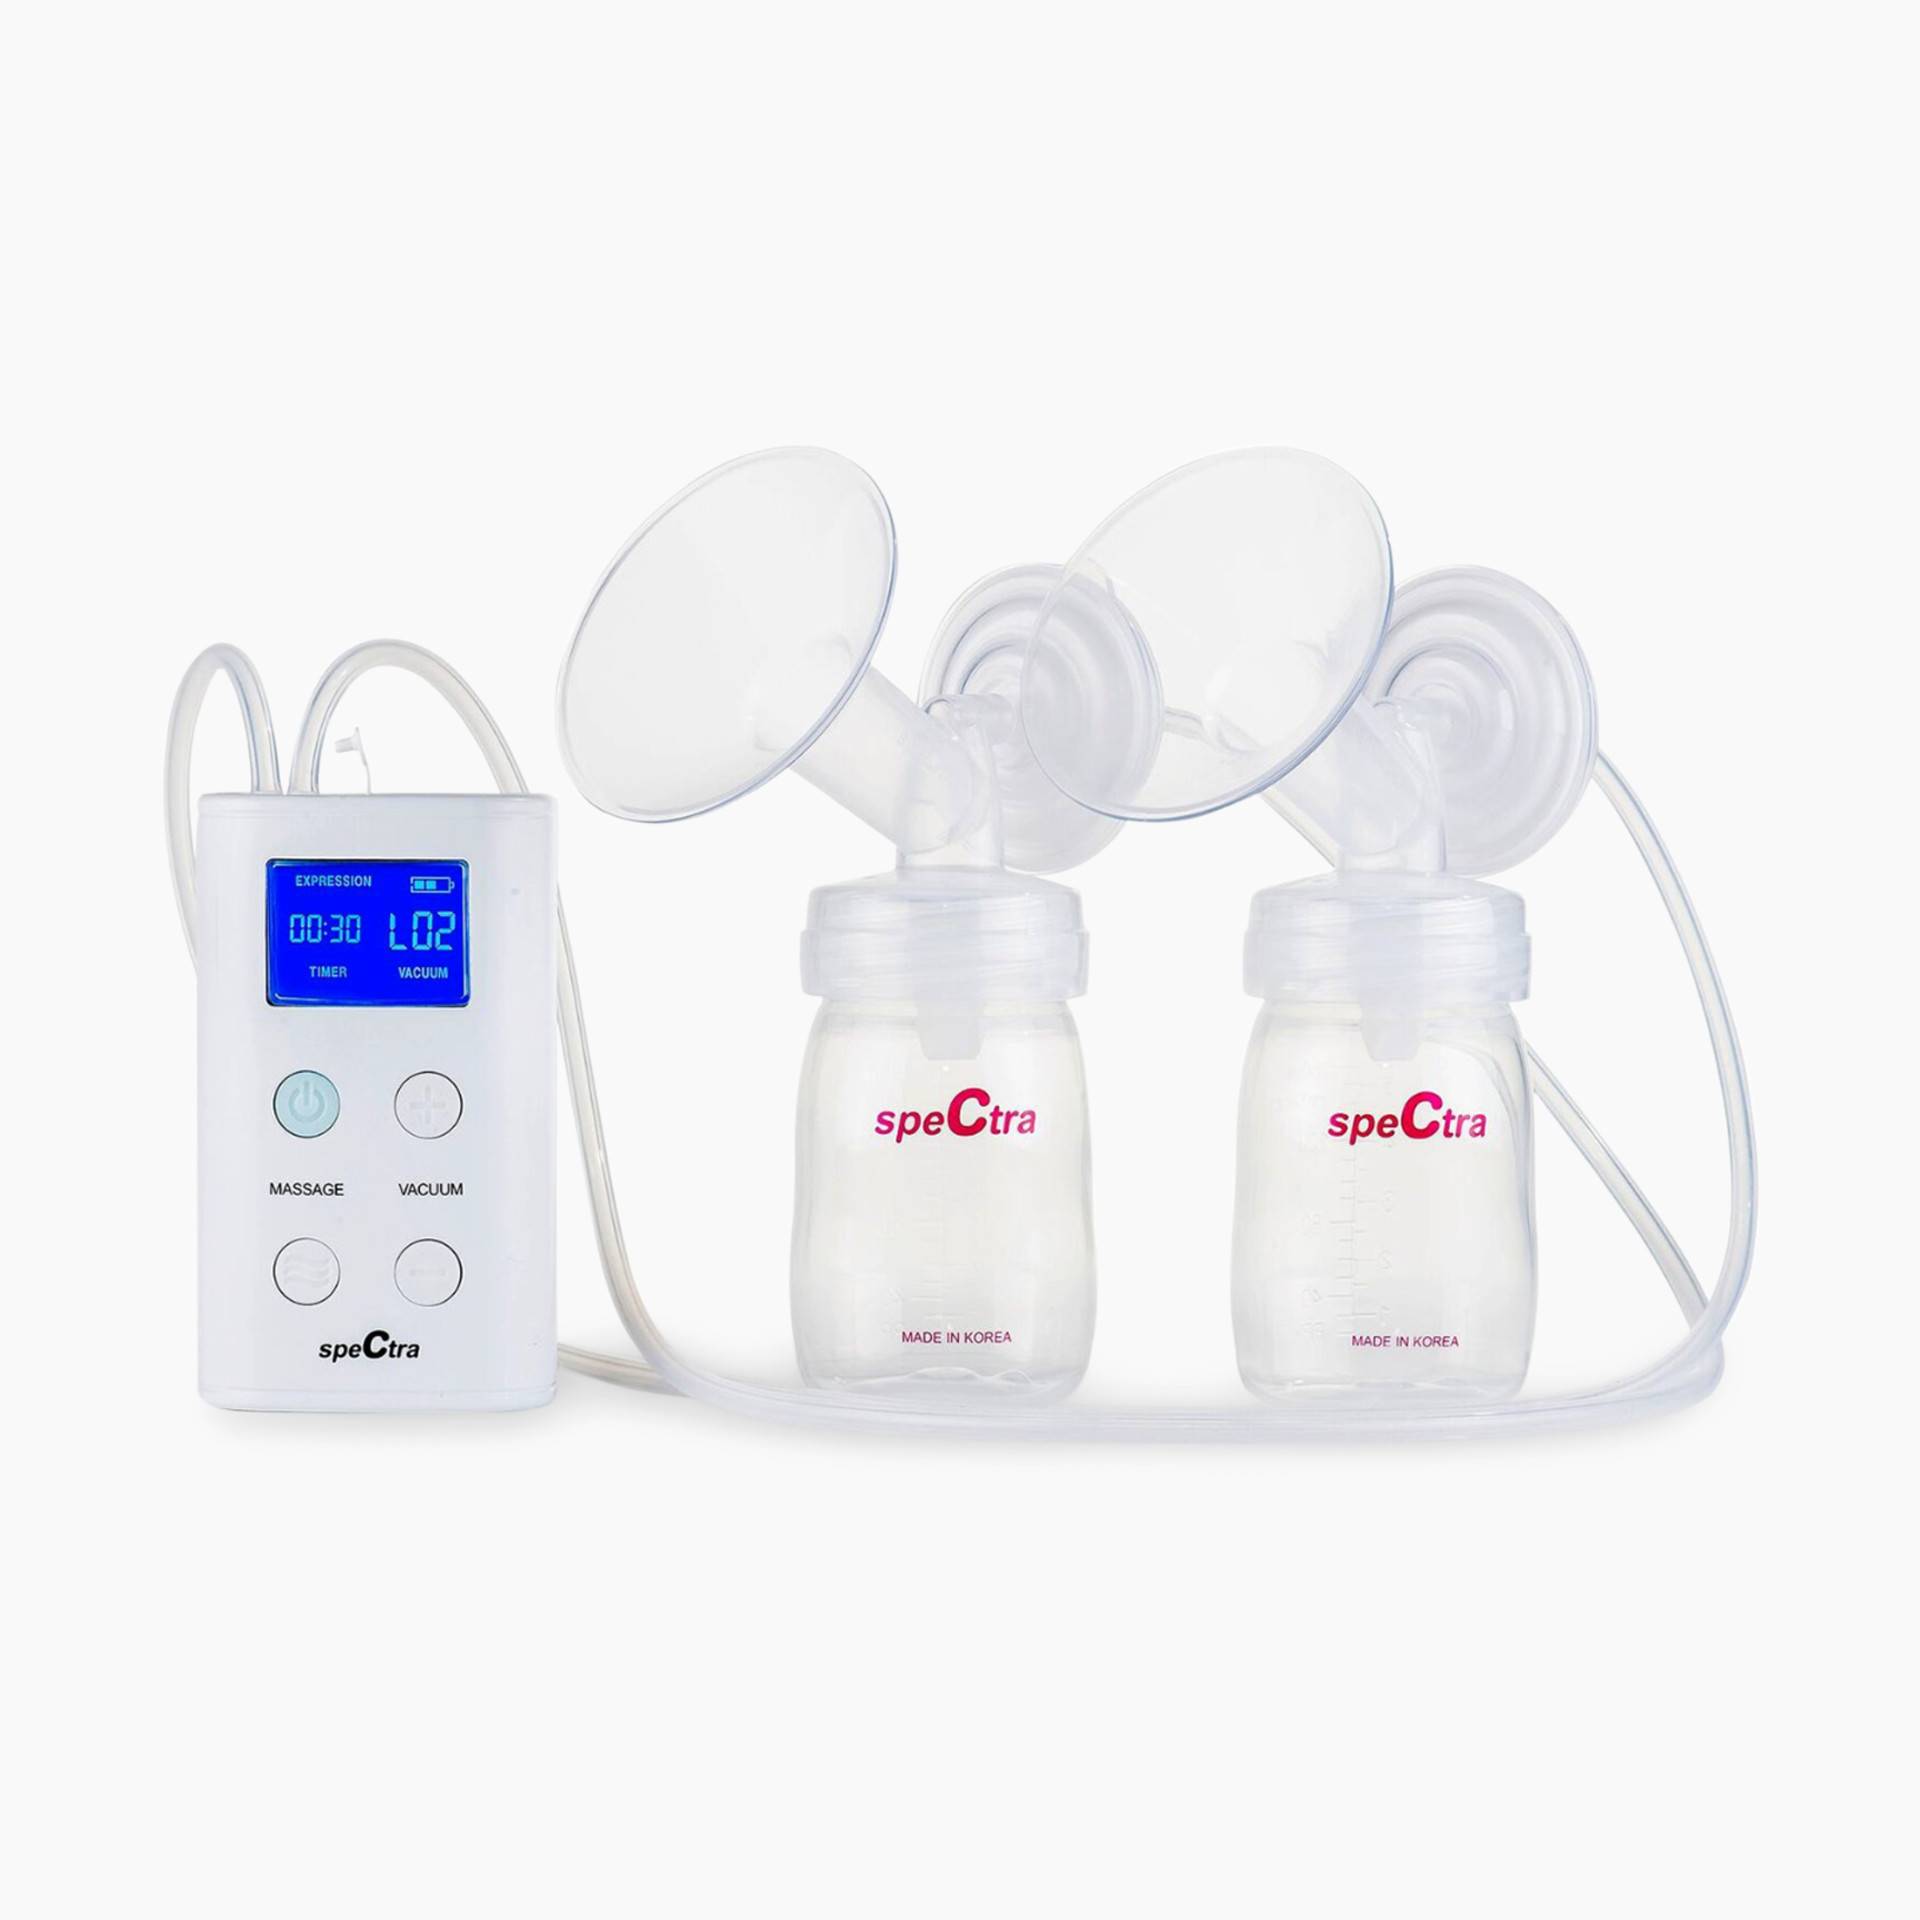 Spectra Synergy Gold Portable Breast Pump Review: Is It The Best? 